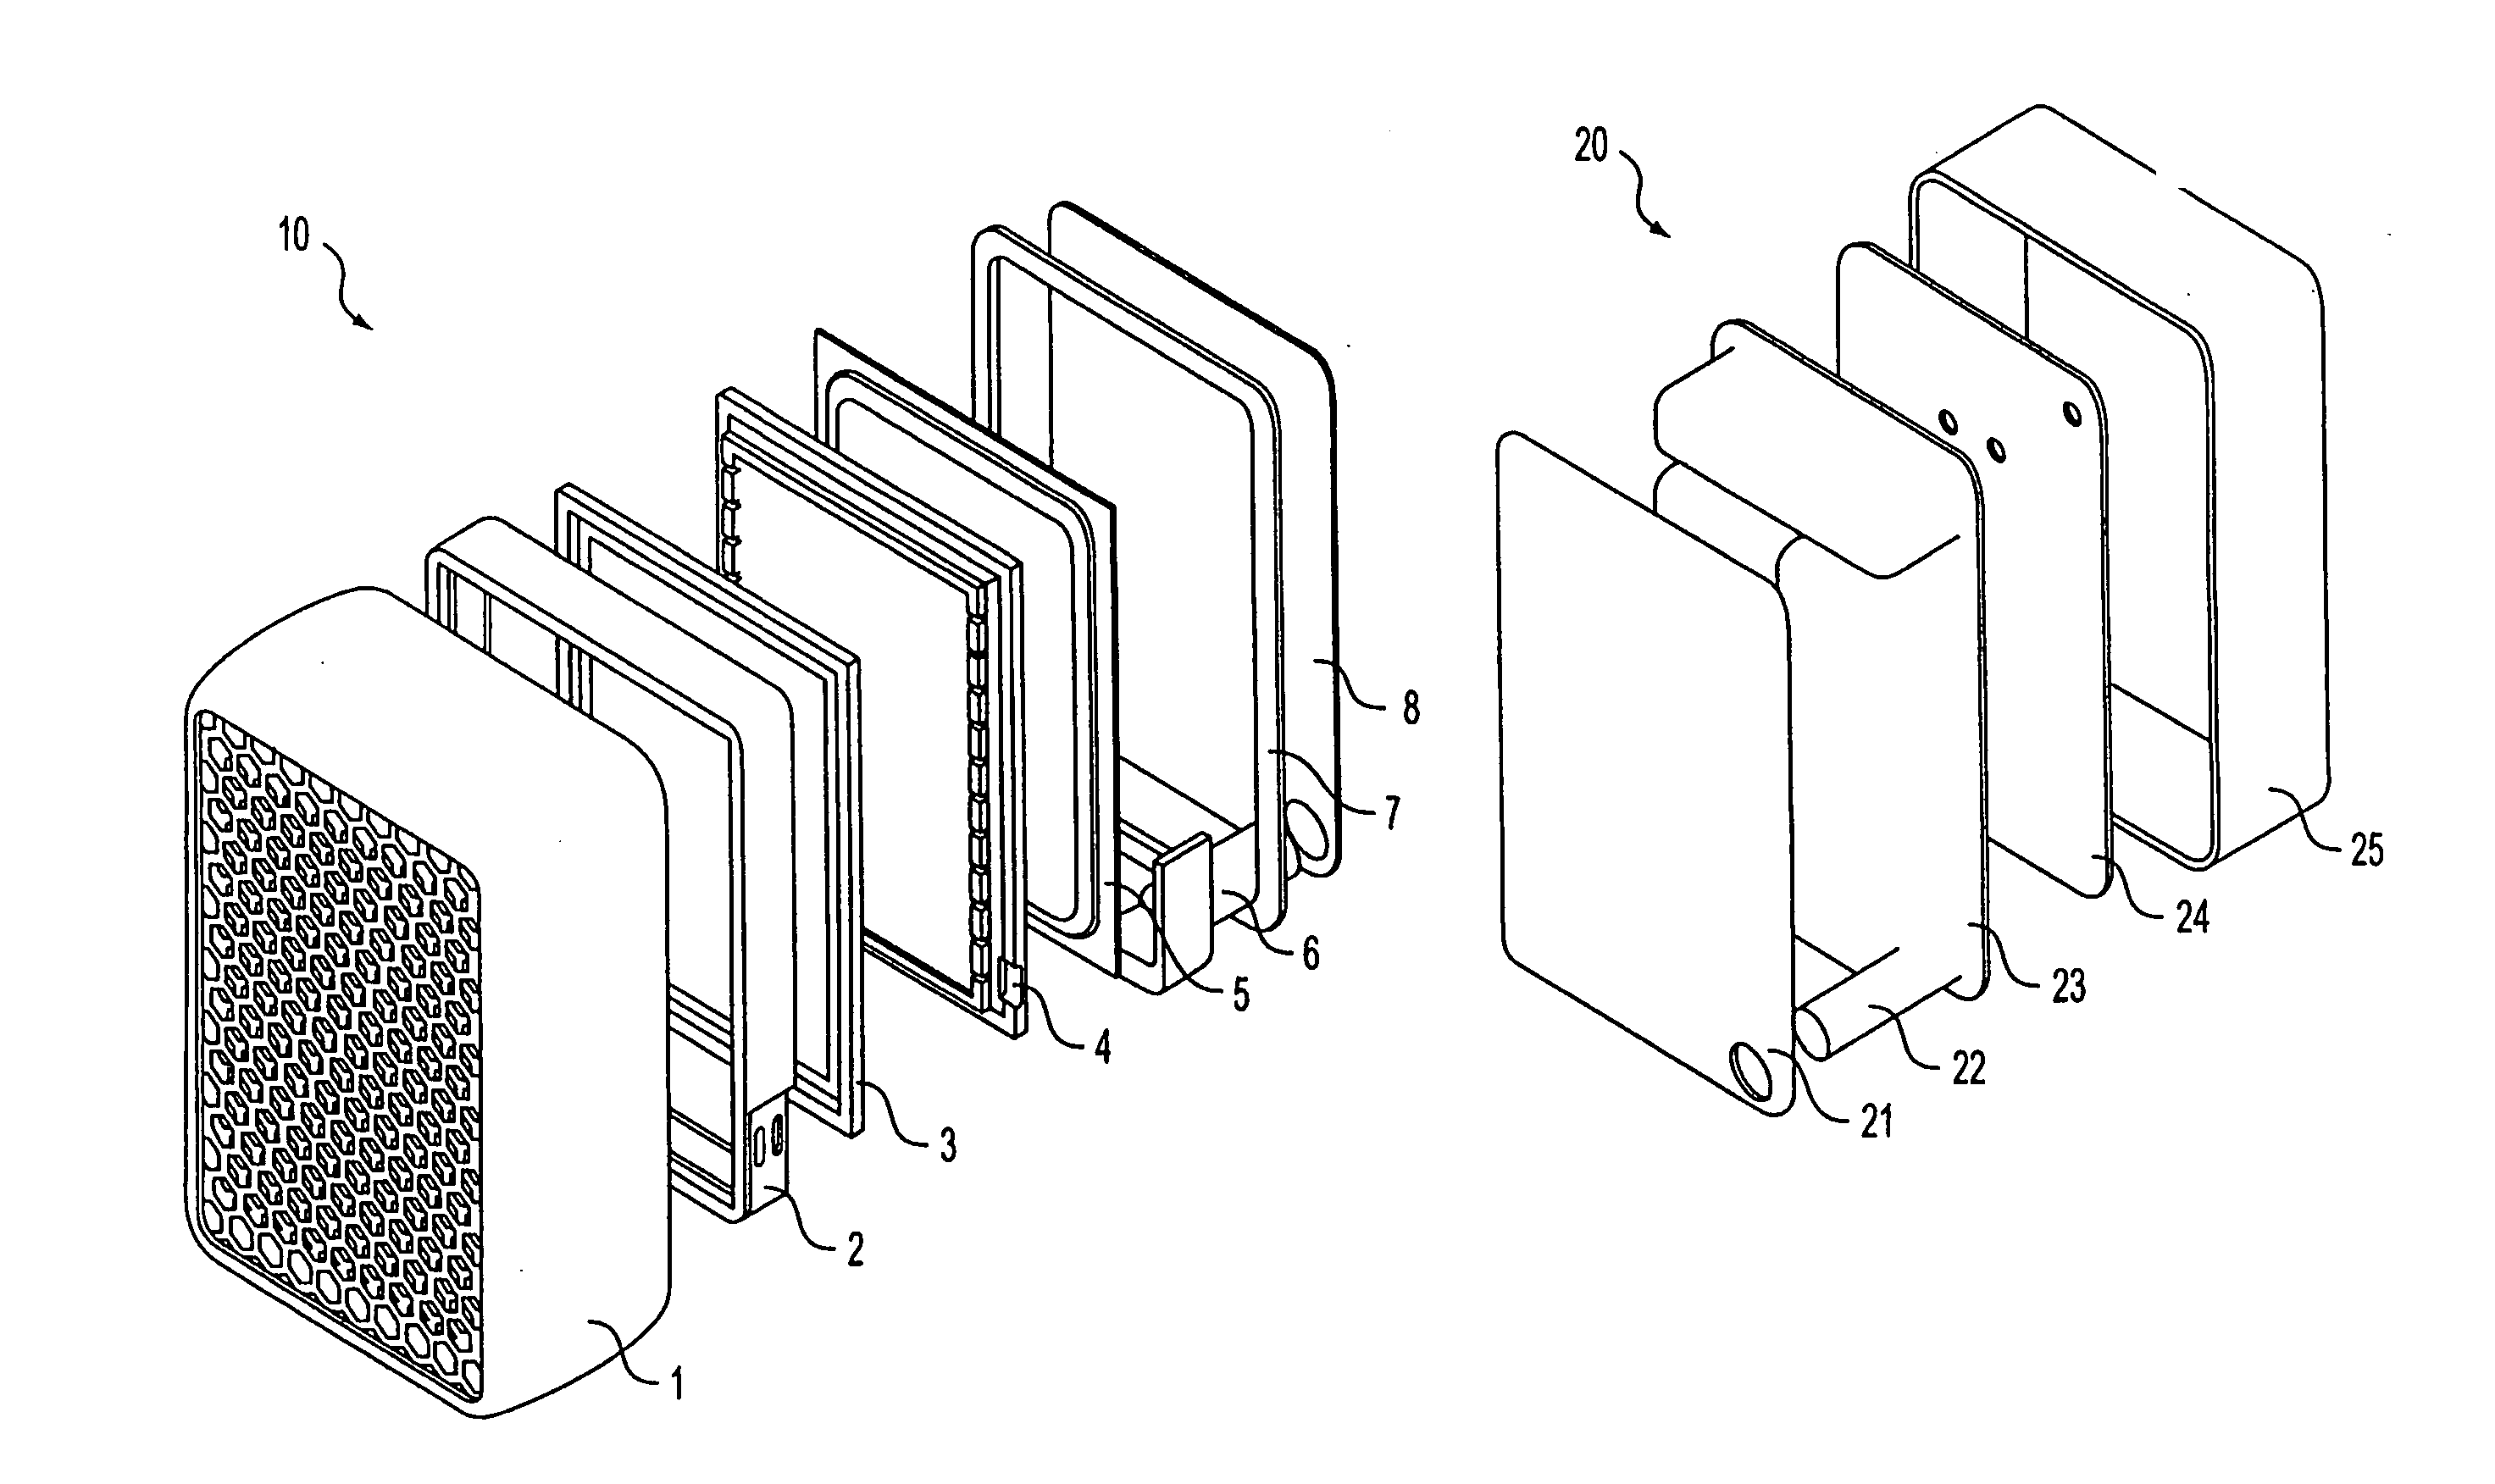 Fuel cell with removable/replaceable cartridge and method of making and using the fuel cell and cartridge